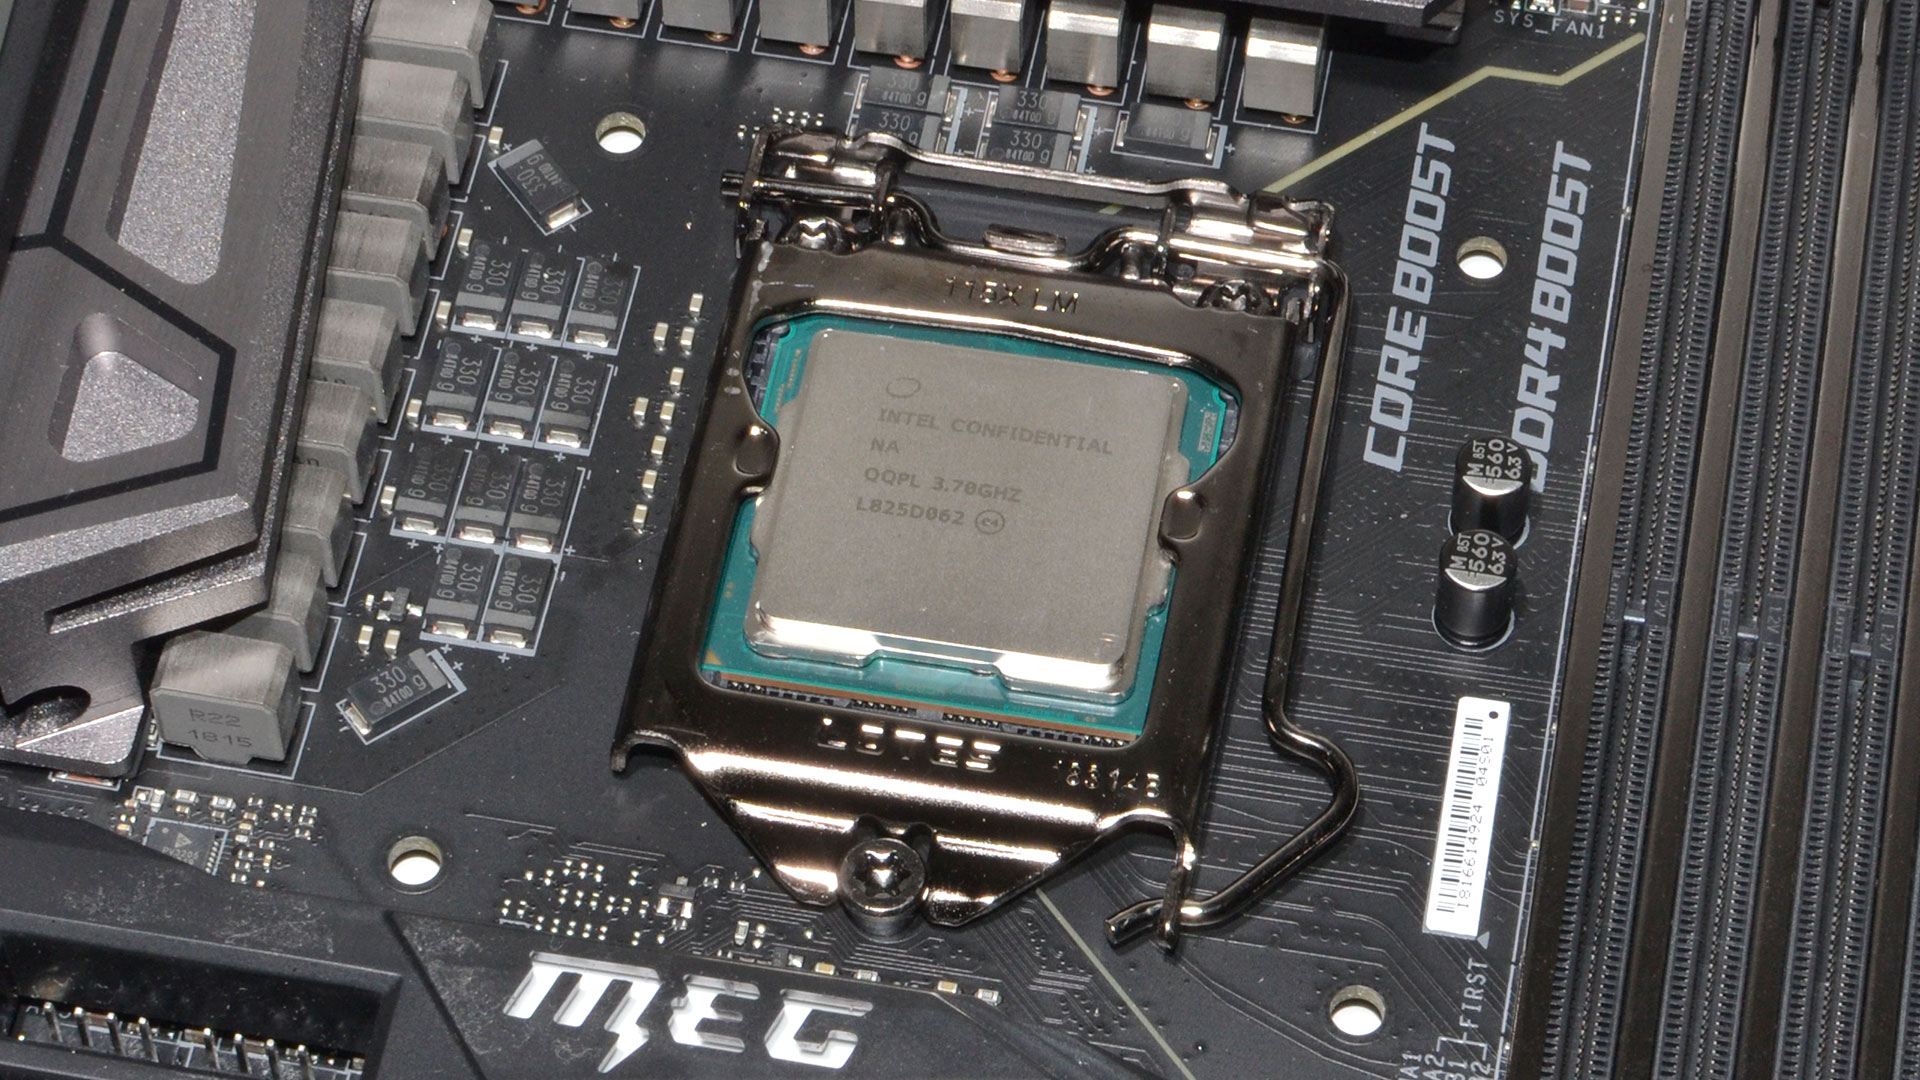 Intel's top-of-the-line Core i9-9900K, in a Z390 motherboard.